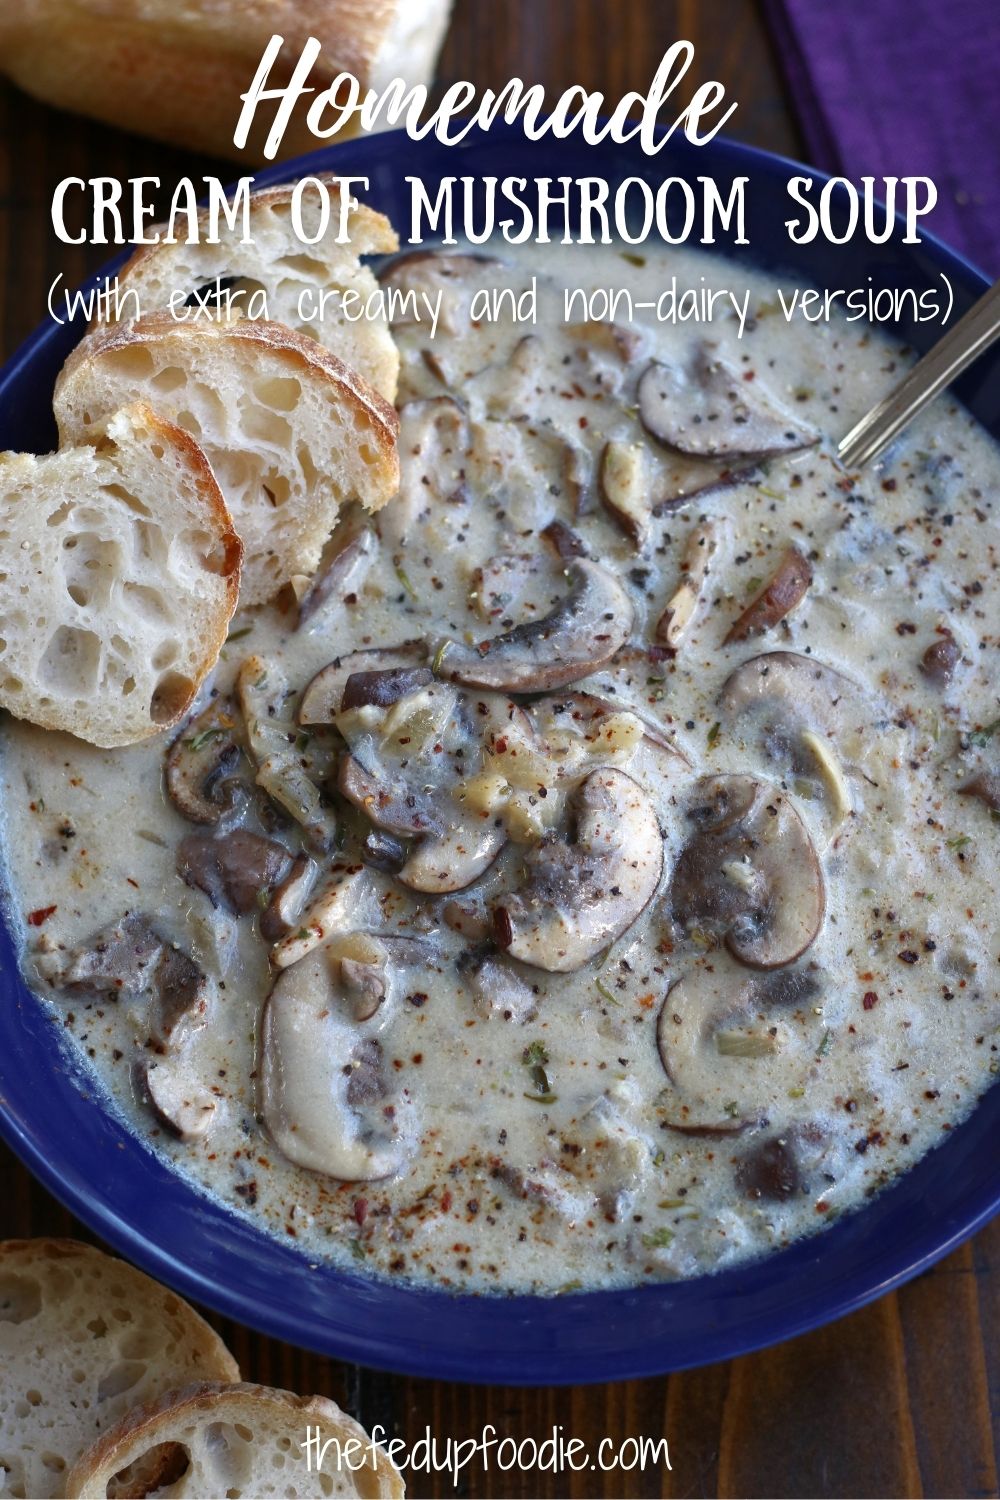 Homemade Cream of Mushroom Soup has a full bodied savory flavor and is loaded with two different kind of mushrooms. This soup is quick and easy to make with both dairy free and extra creamy options. However, for a deep rich flavor take the extra time and caramelize the onions. 
#CreamOfMushroomSoup #DairyFreeCreamOfMushroomSoup #CreamOfMushroomSoupDIY #EasyMushroomSoup #HomeMadeCreamOfMushroomSoup